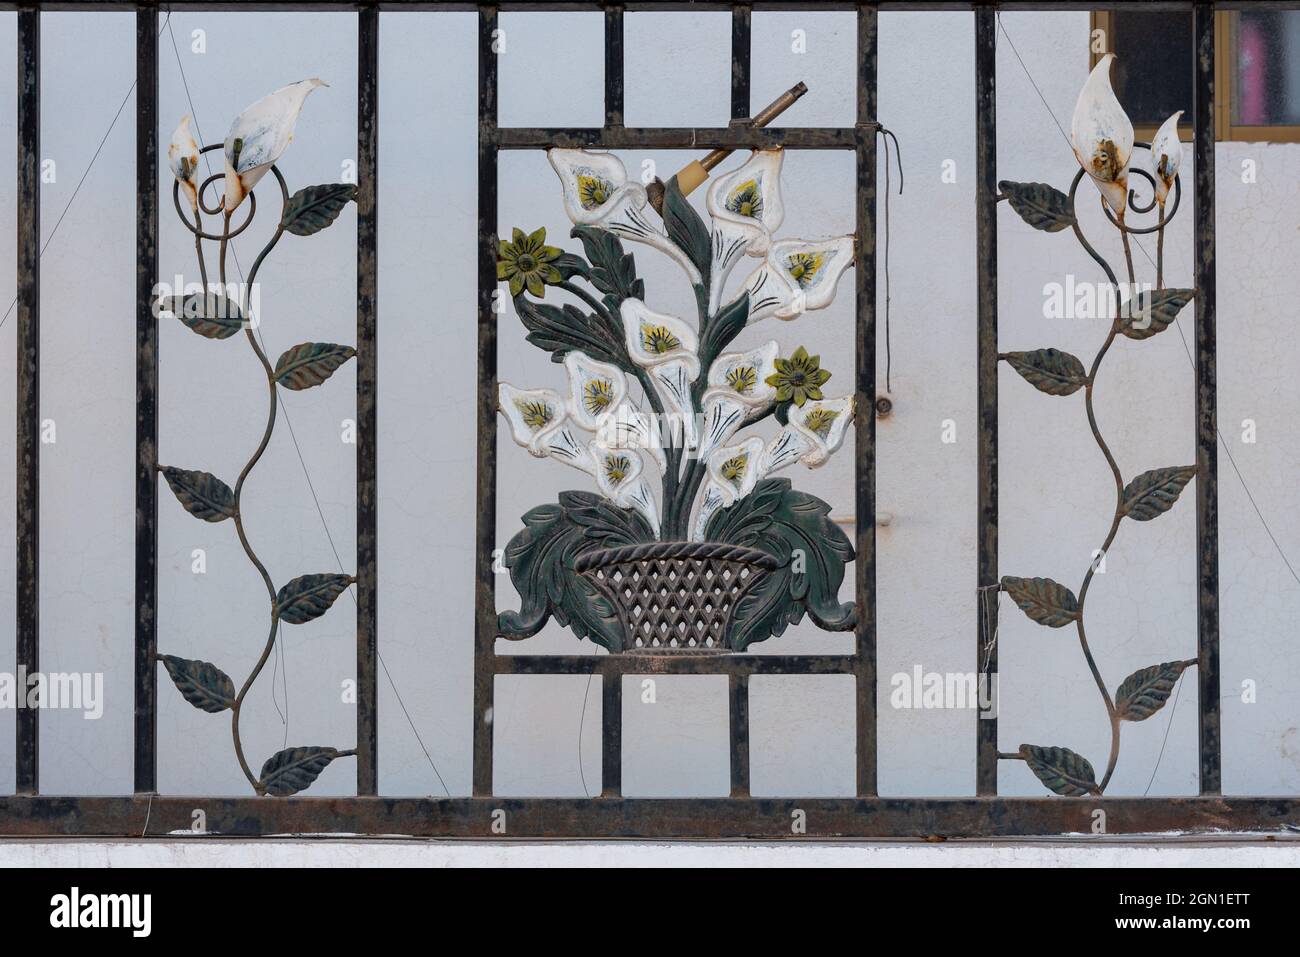 A decorative ironworks gate in front of a home in Mexico. Stock Photo